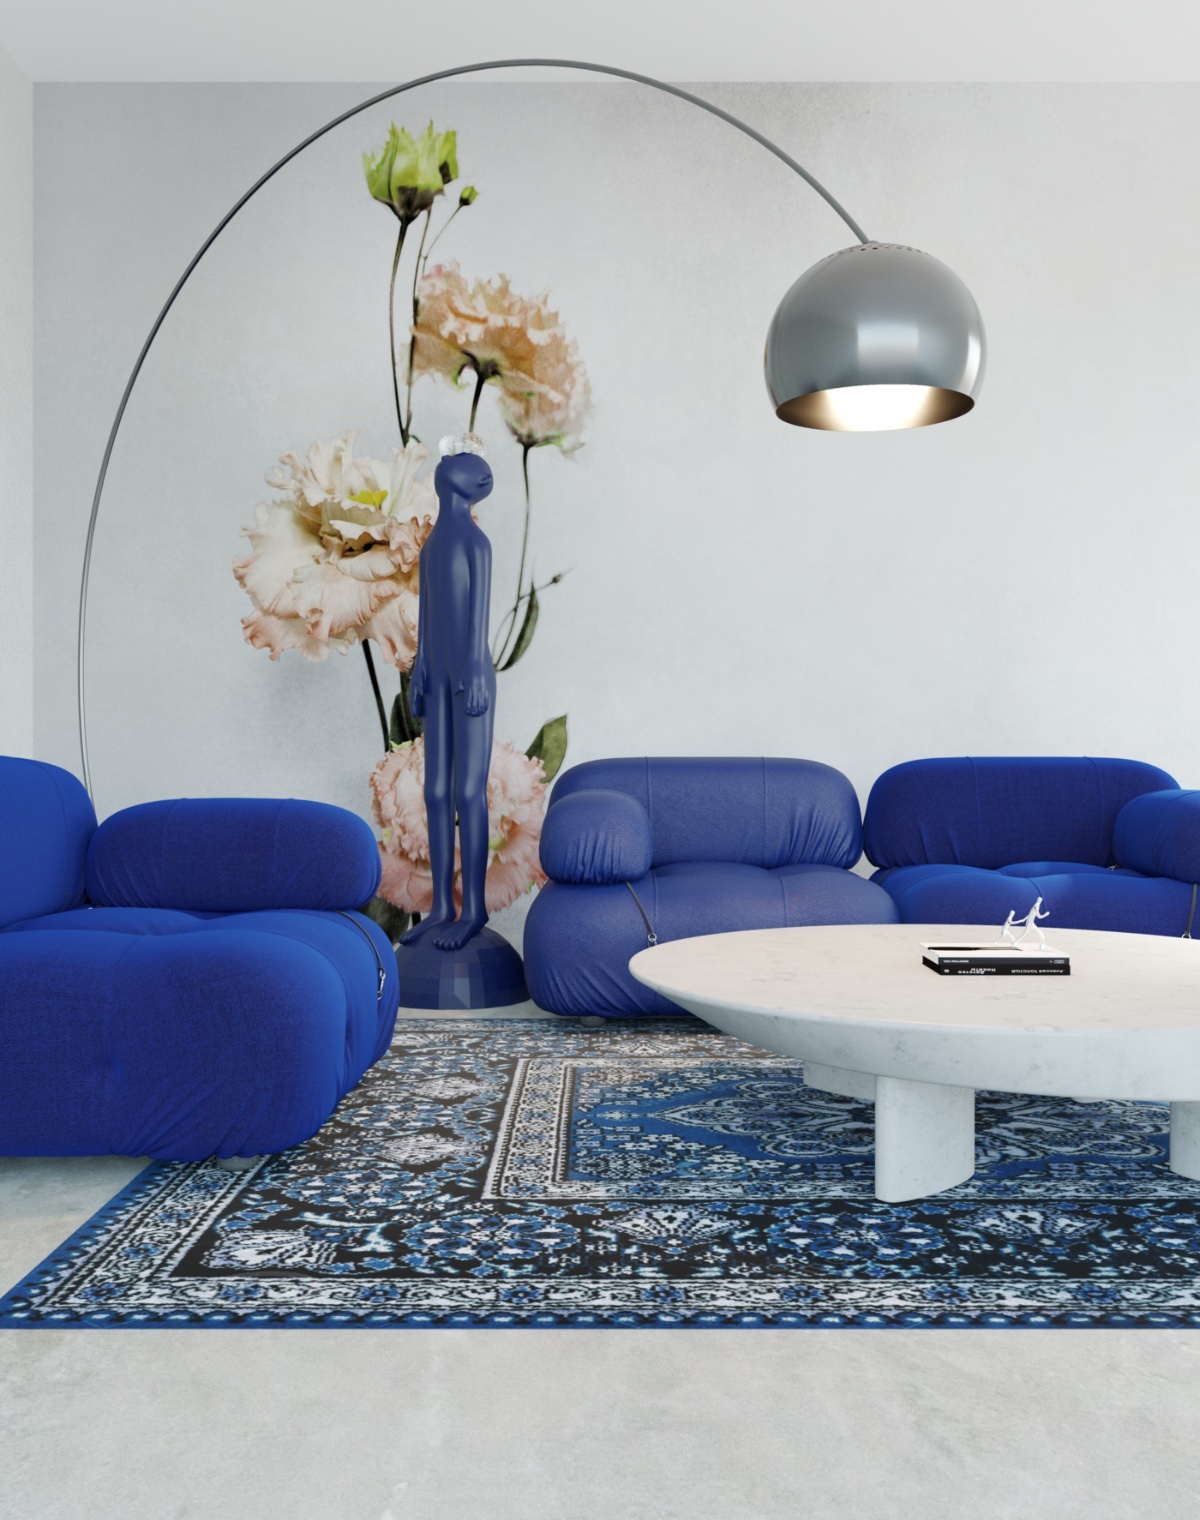 Blue couch living room ideas: 10 ways to complement this standout color |